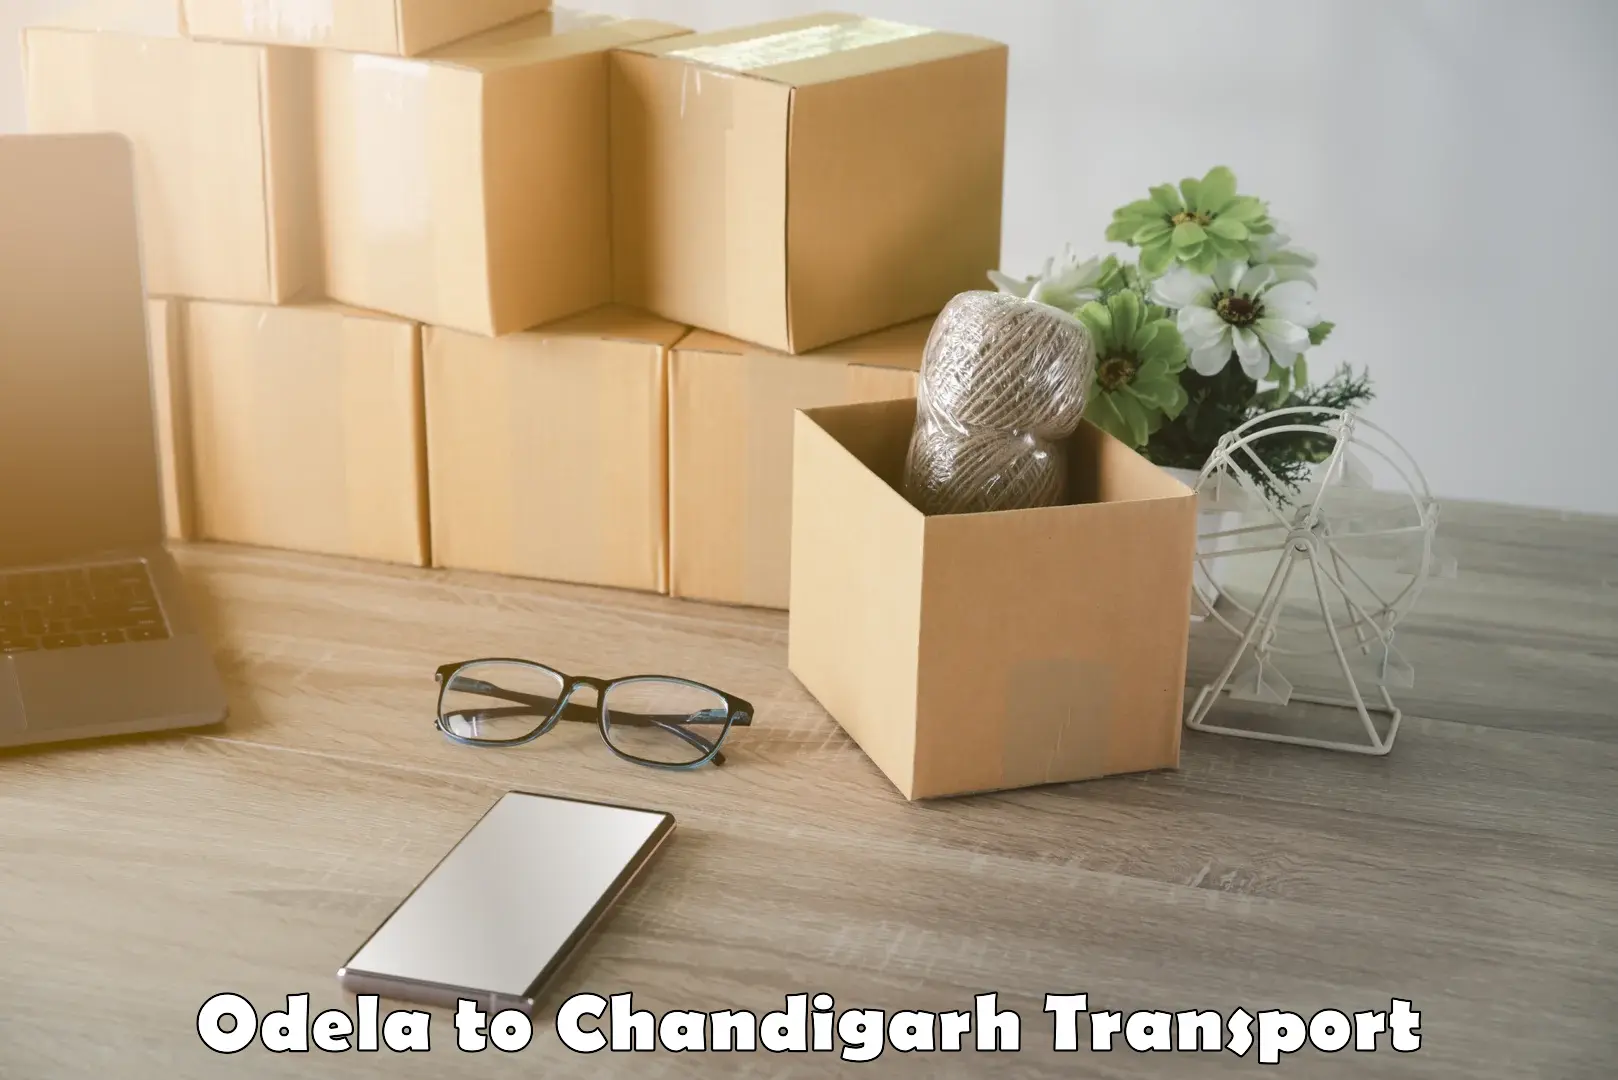 Delivery service Odela to Chandigarh